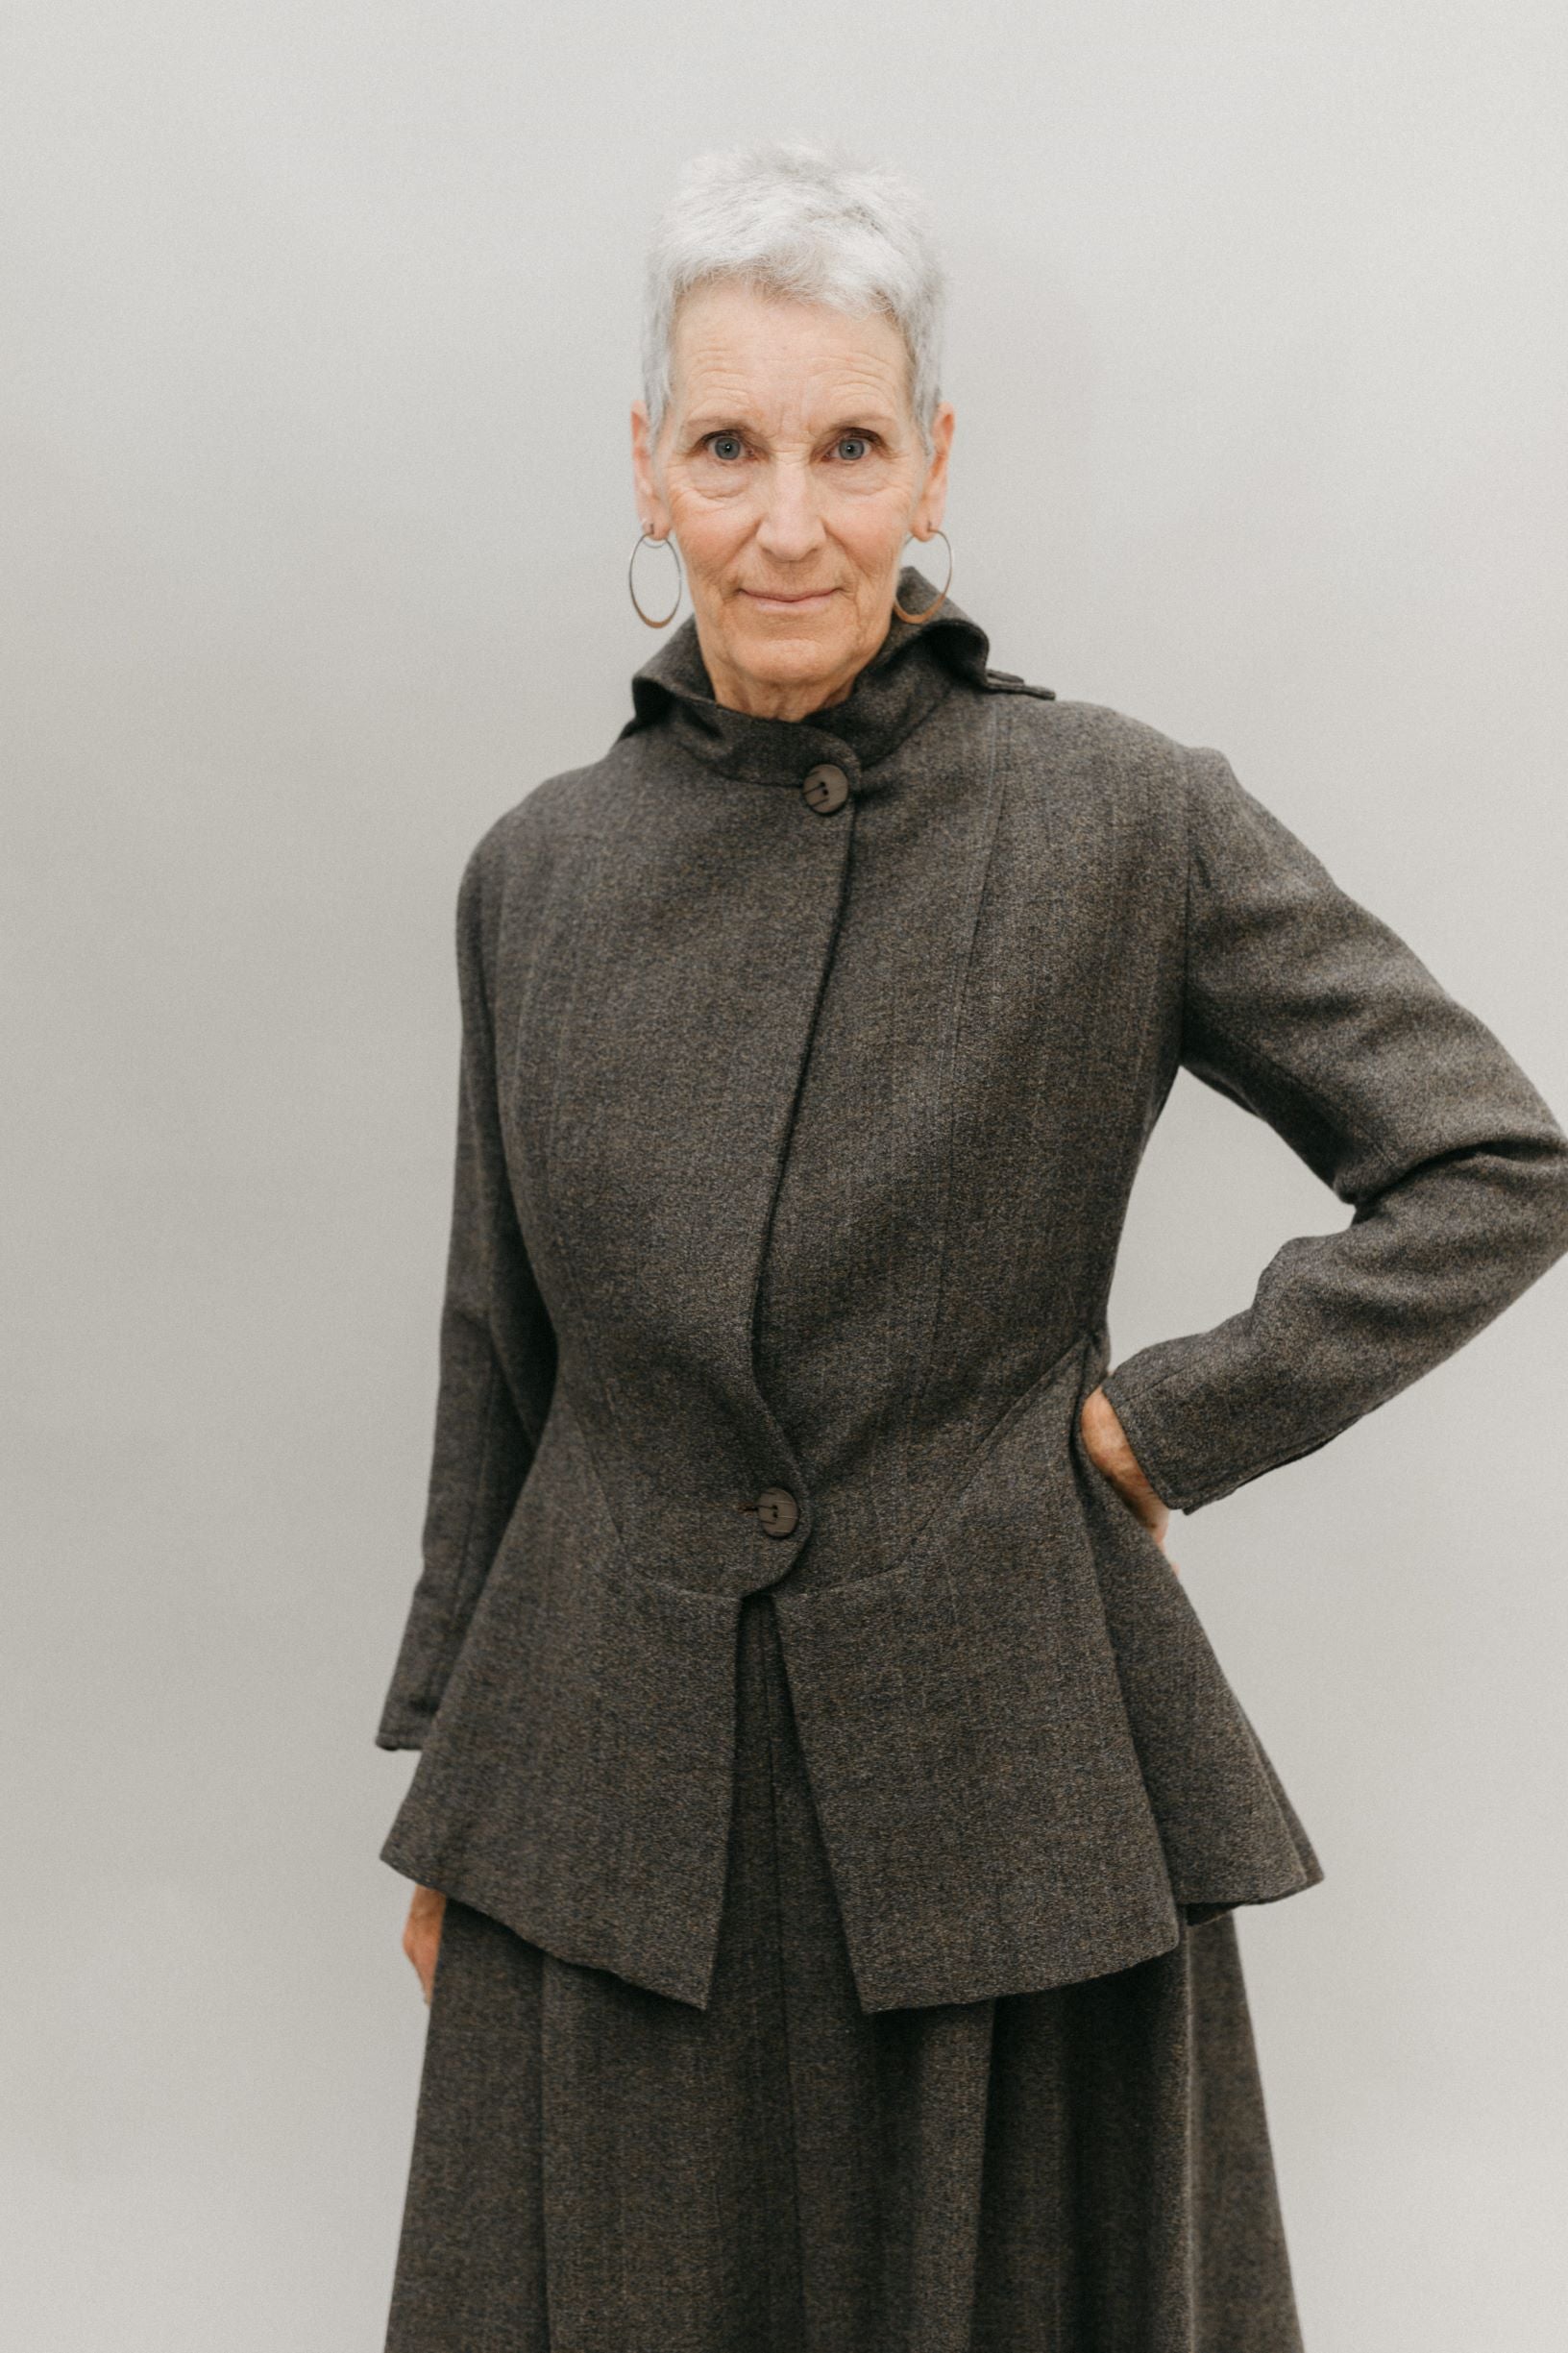 Older white woman with gray hair with her left hand on her hip, standing in front of a white studio backdrop wearing the traveling suit buttoned 